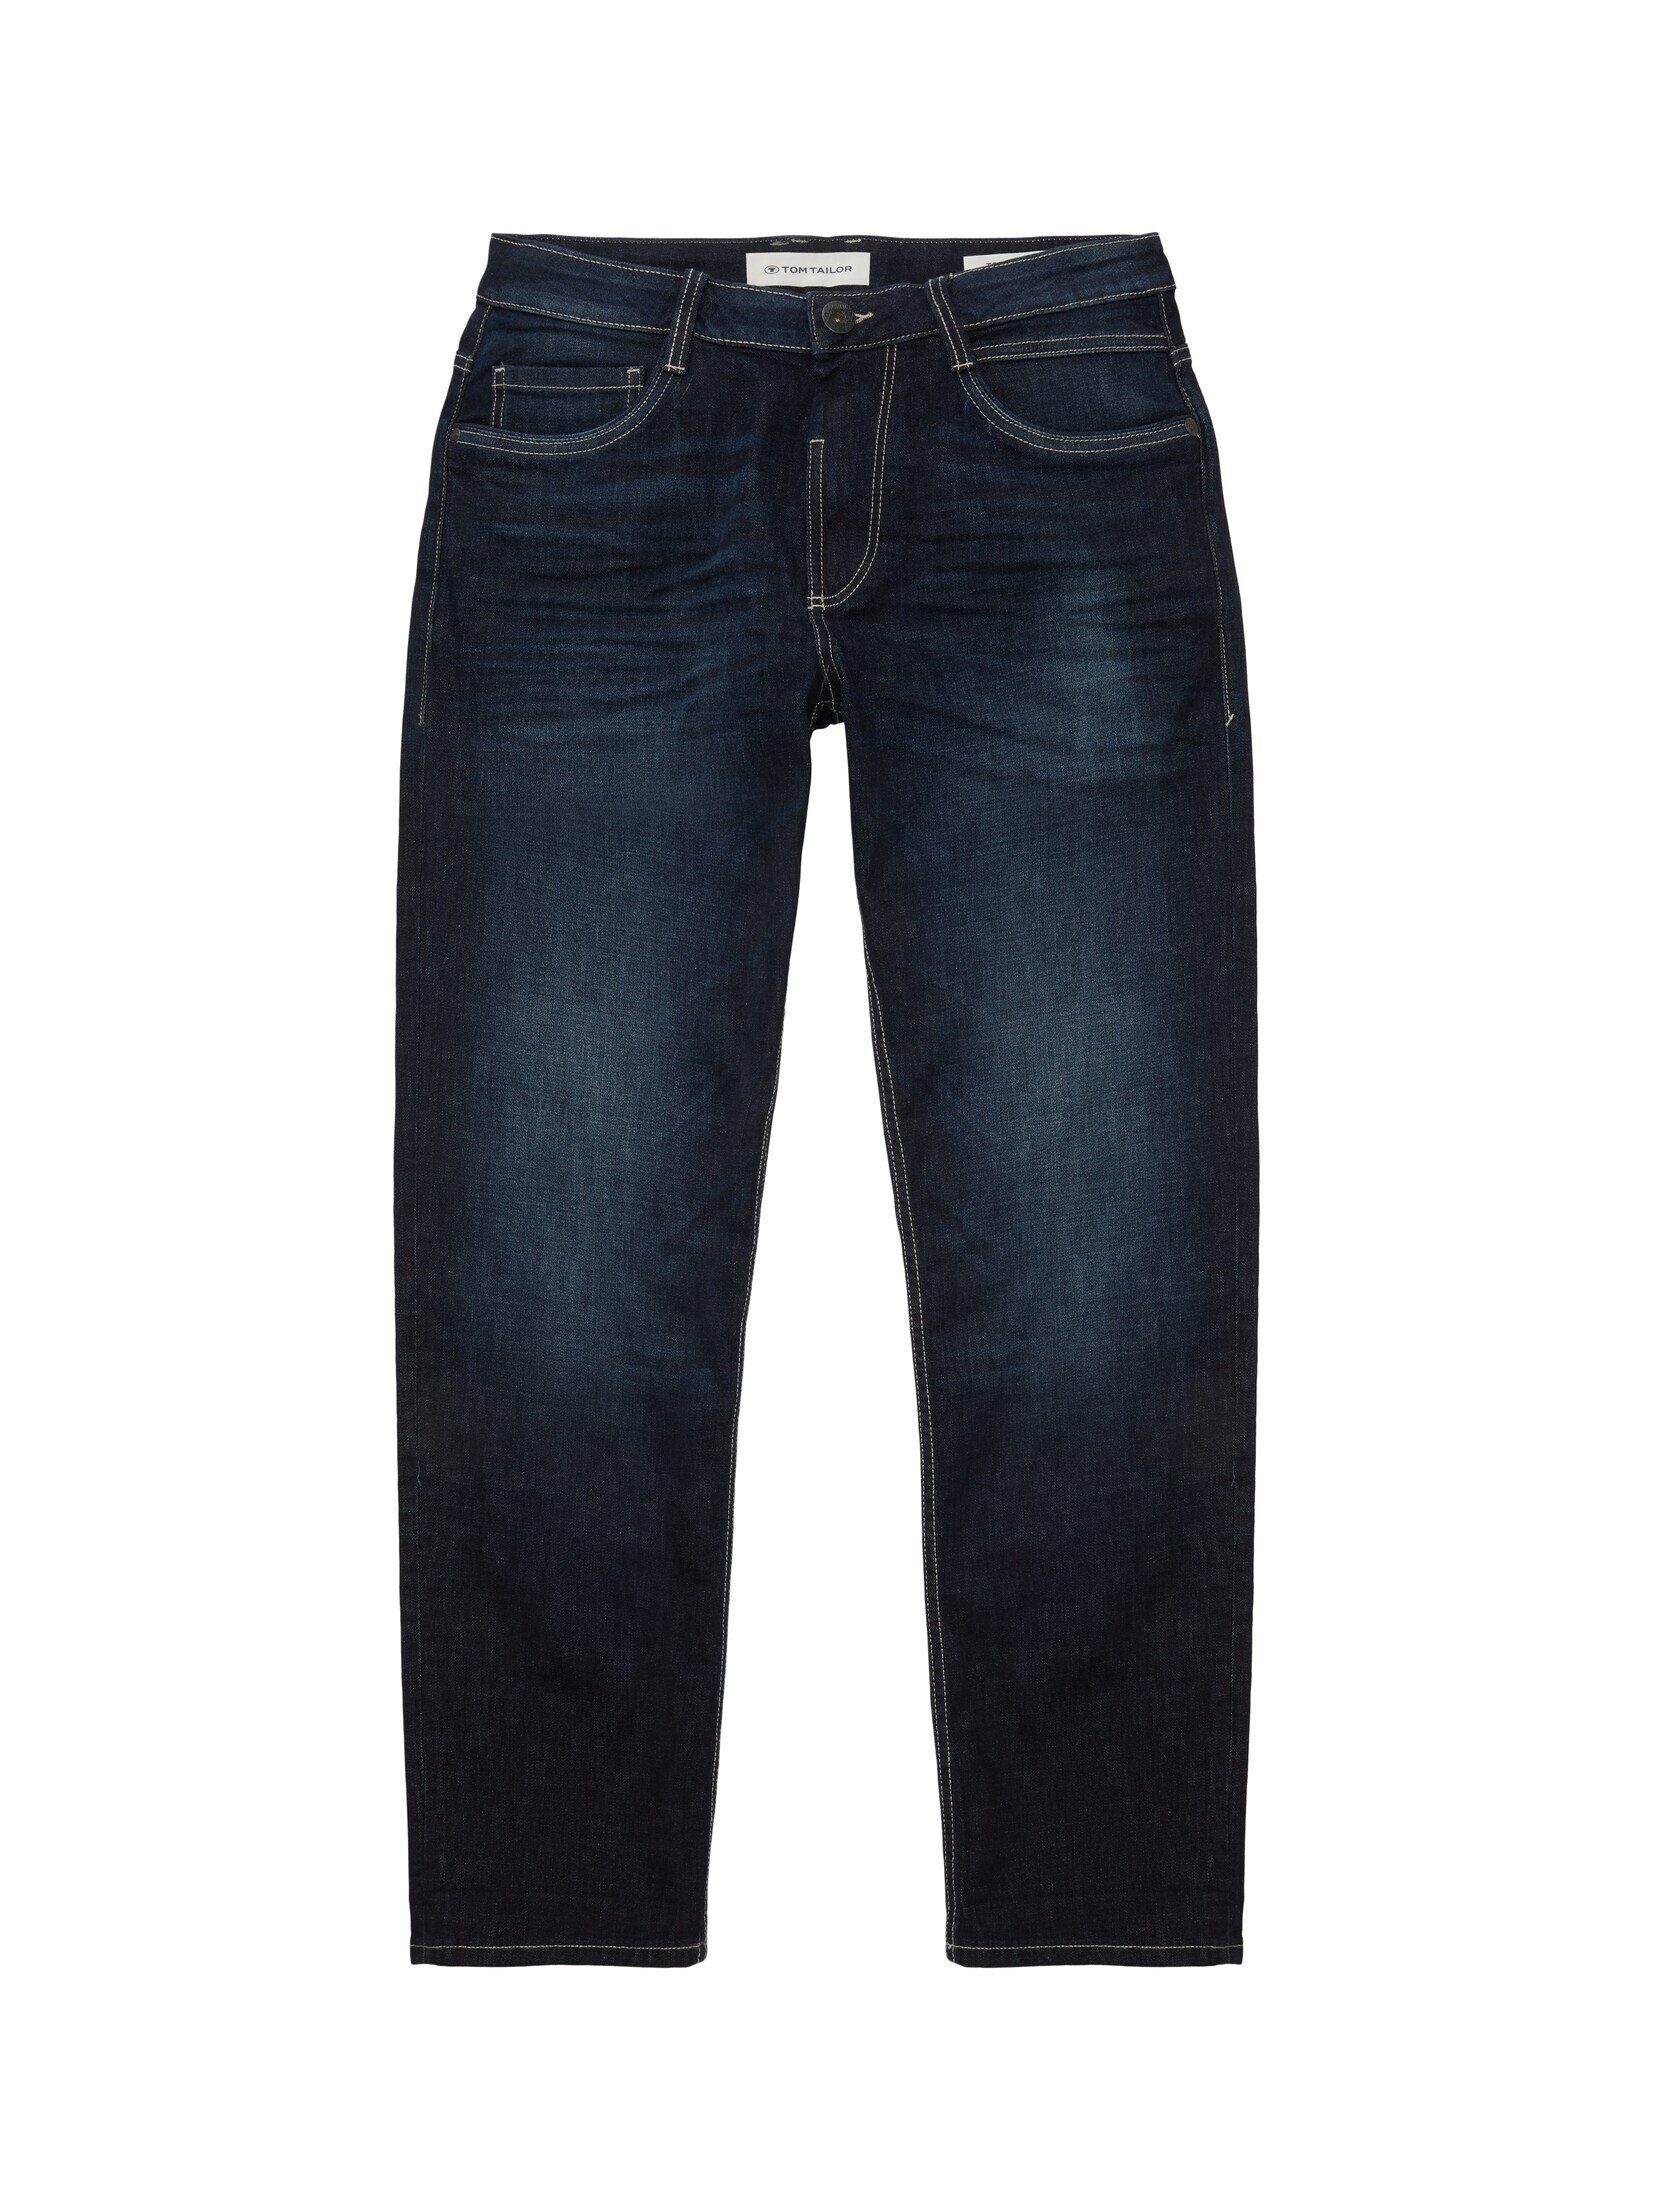 Stone Trad Blue Relaxed Dark TOM TAILOR Jeans Denim Straight-Jeans Used